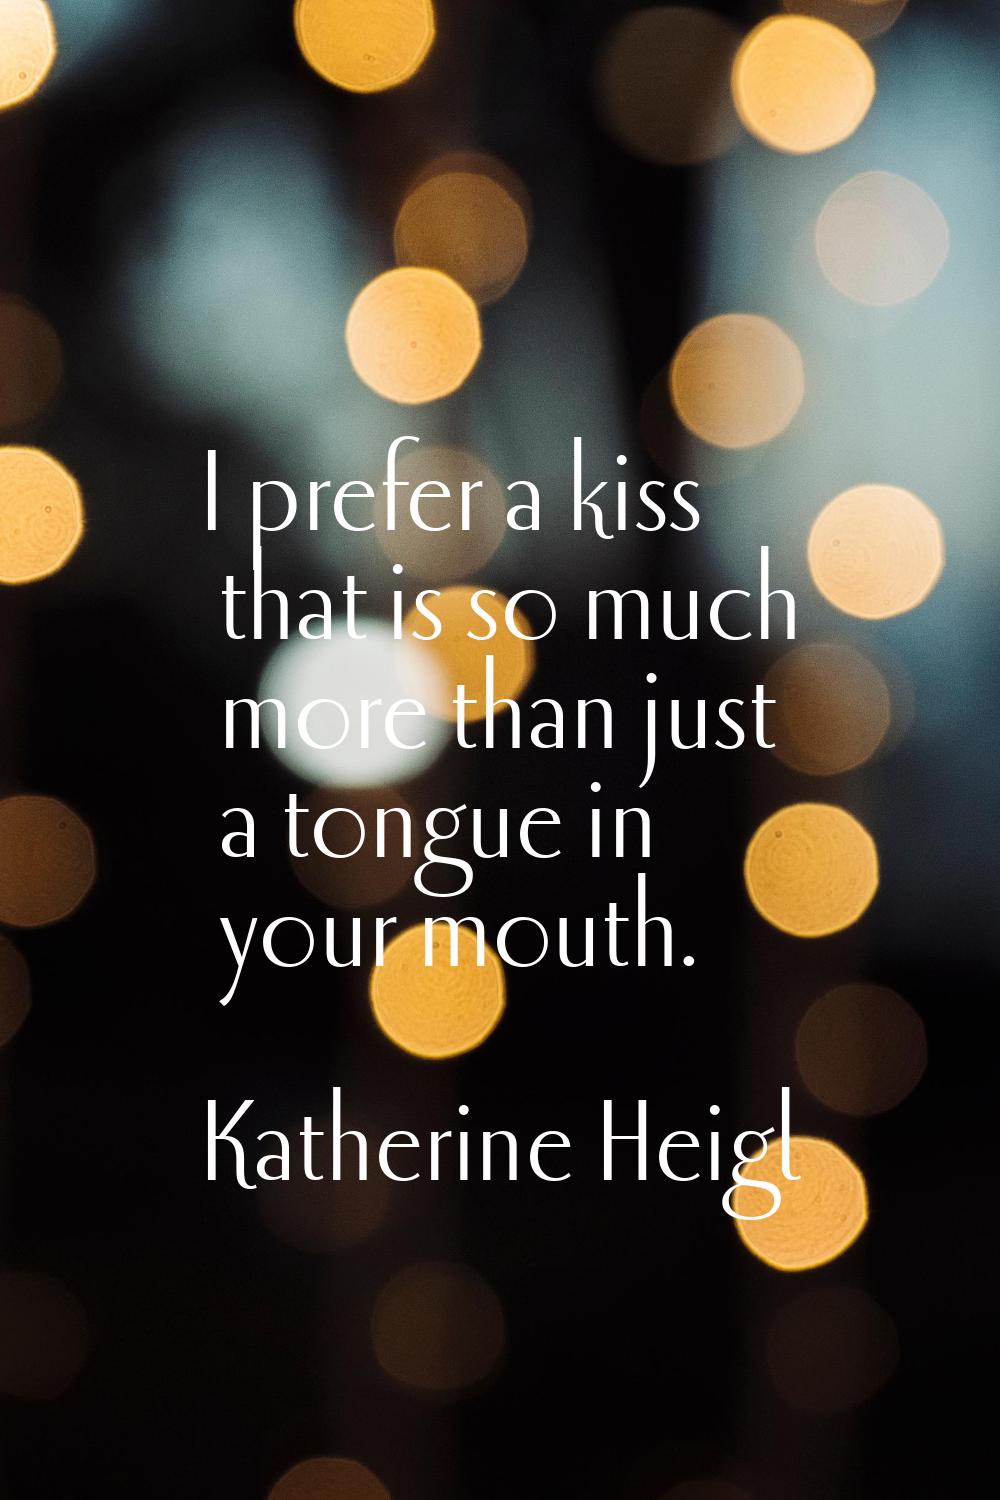 I prefer a kiss that is so much more than just a tongue in your mouth.